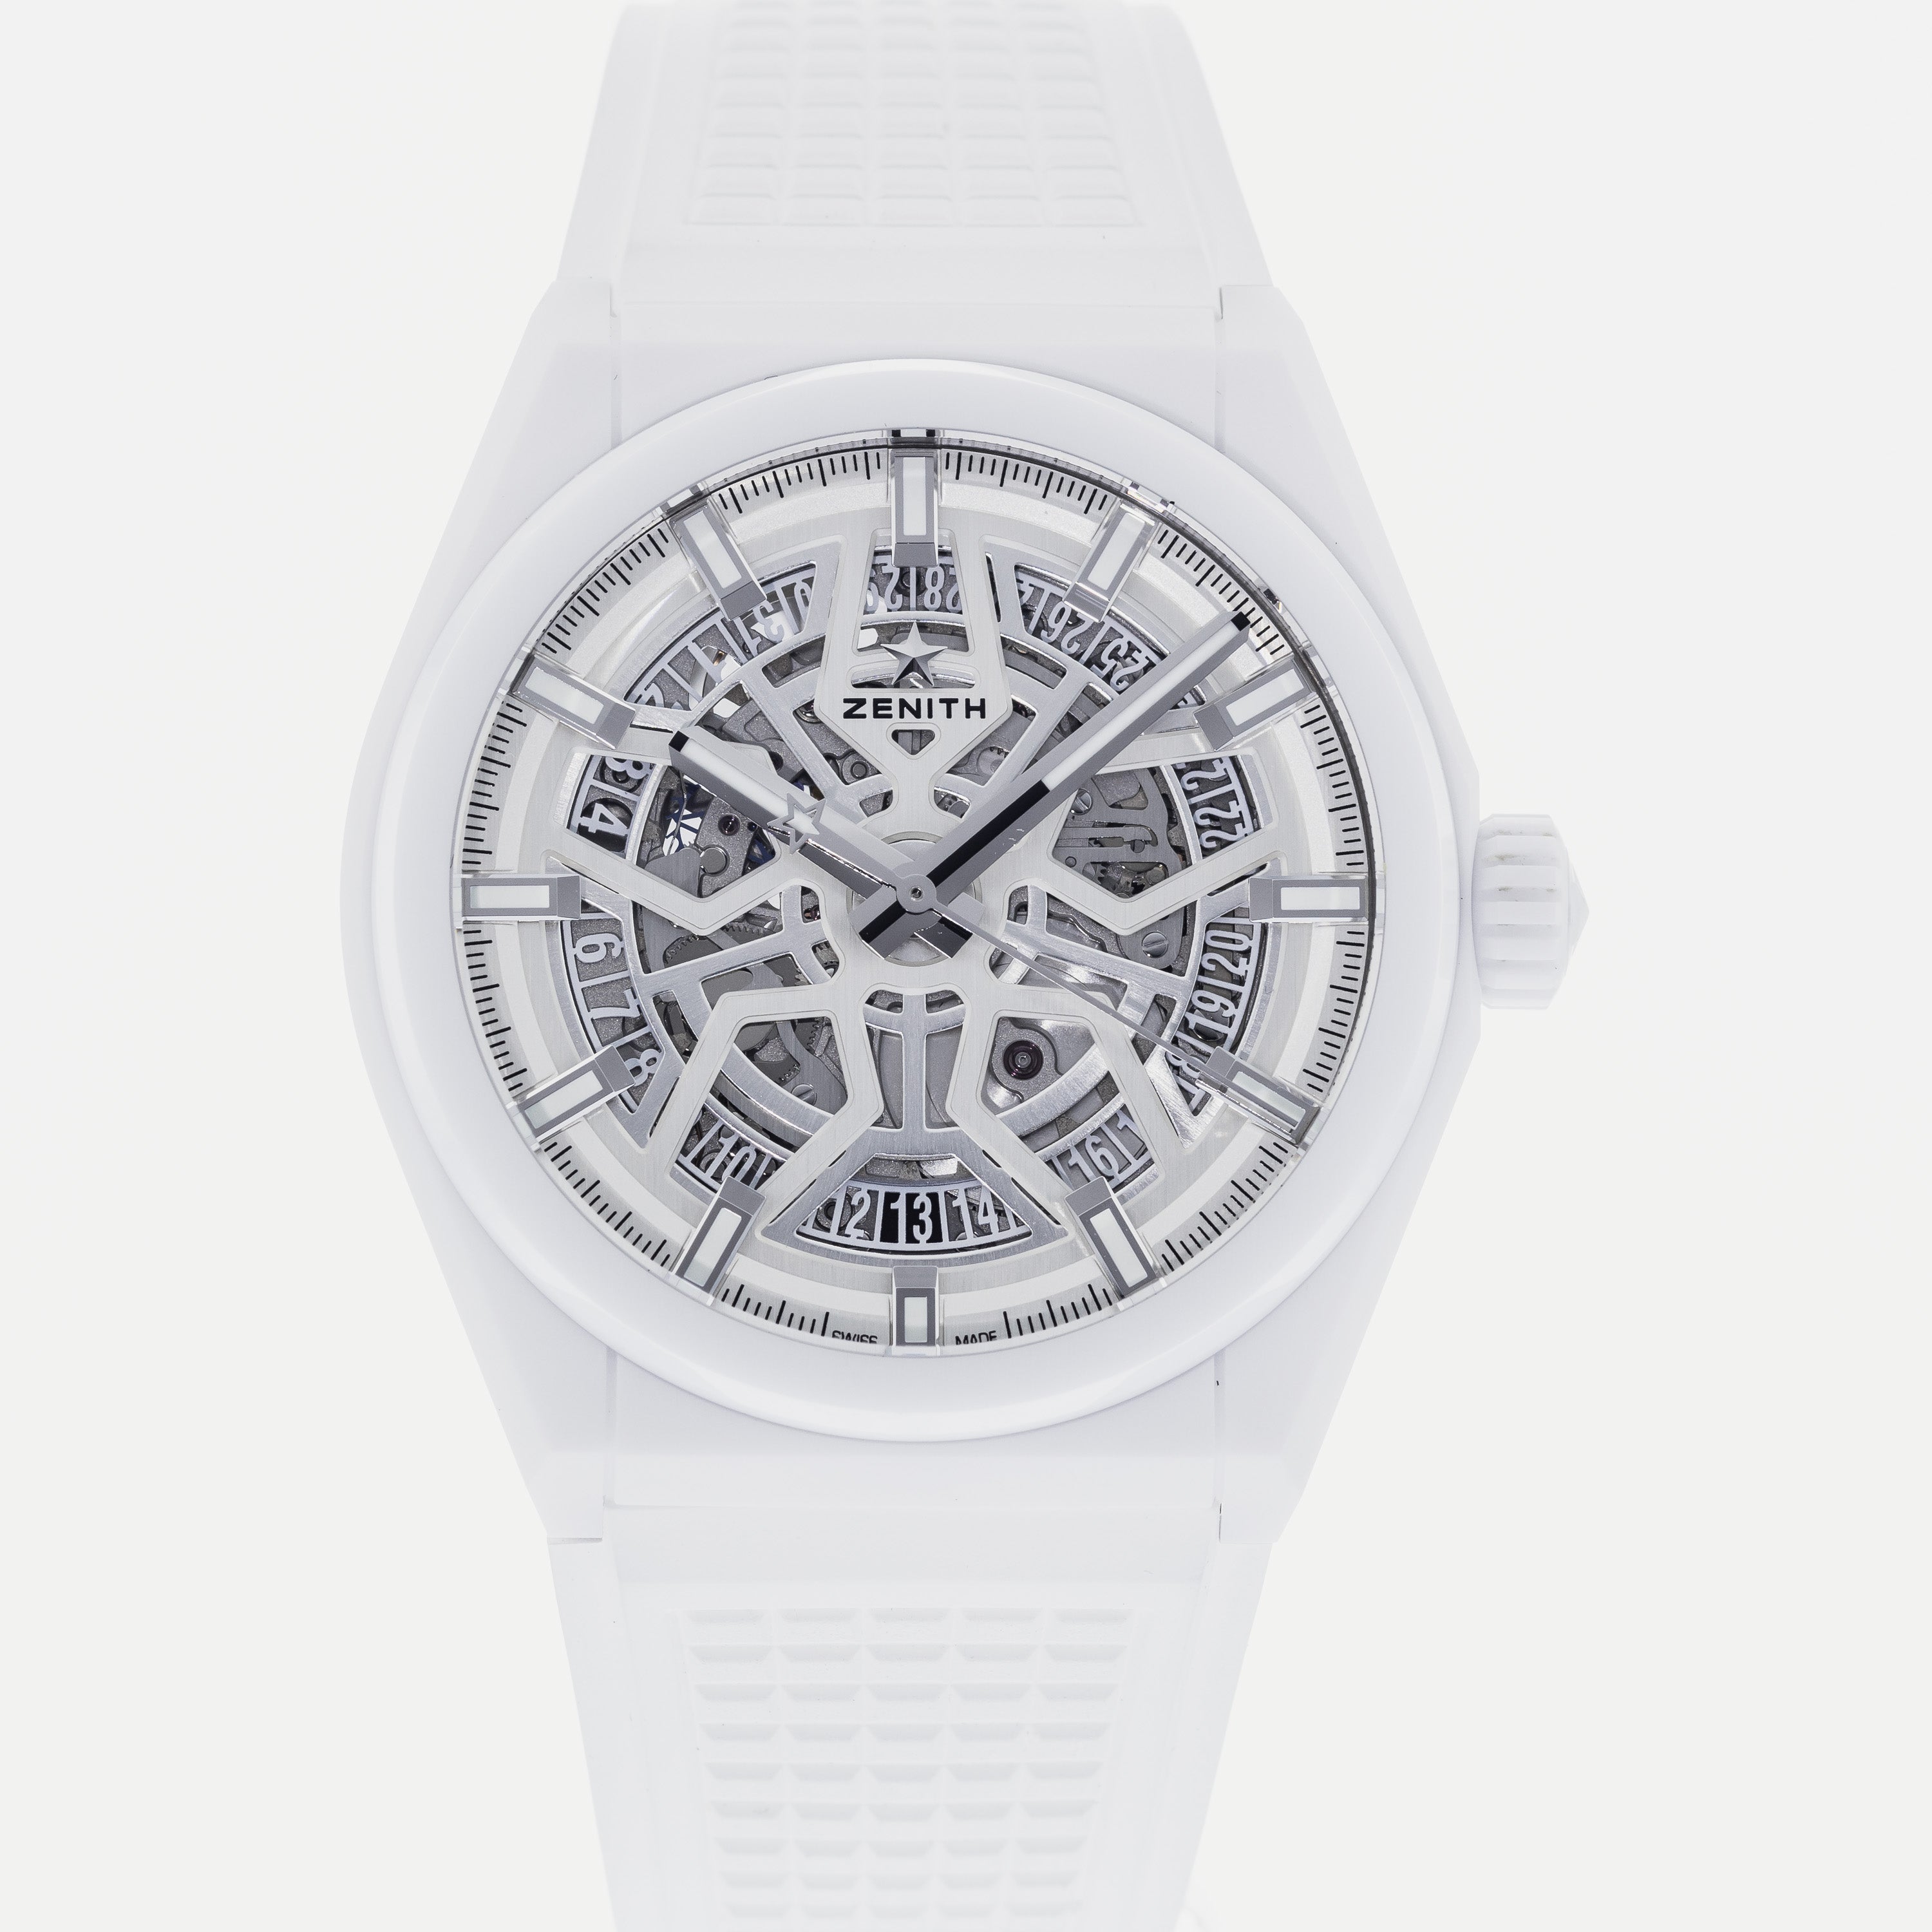 Authentic Used Zenith Defy Classic White Ceramic 49.9002.670 Watch